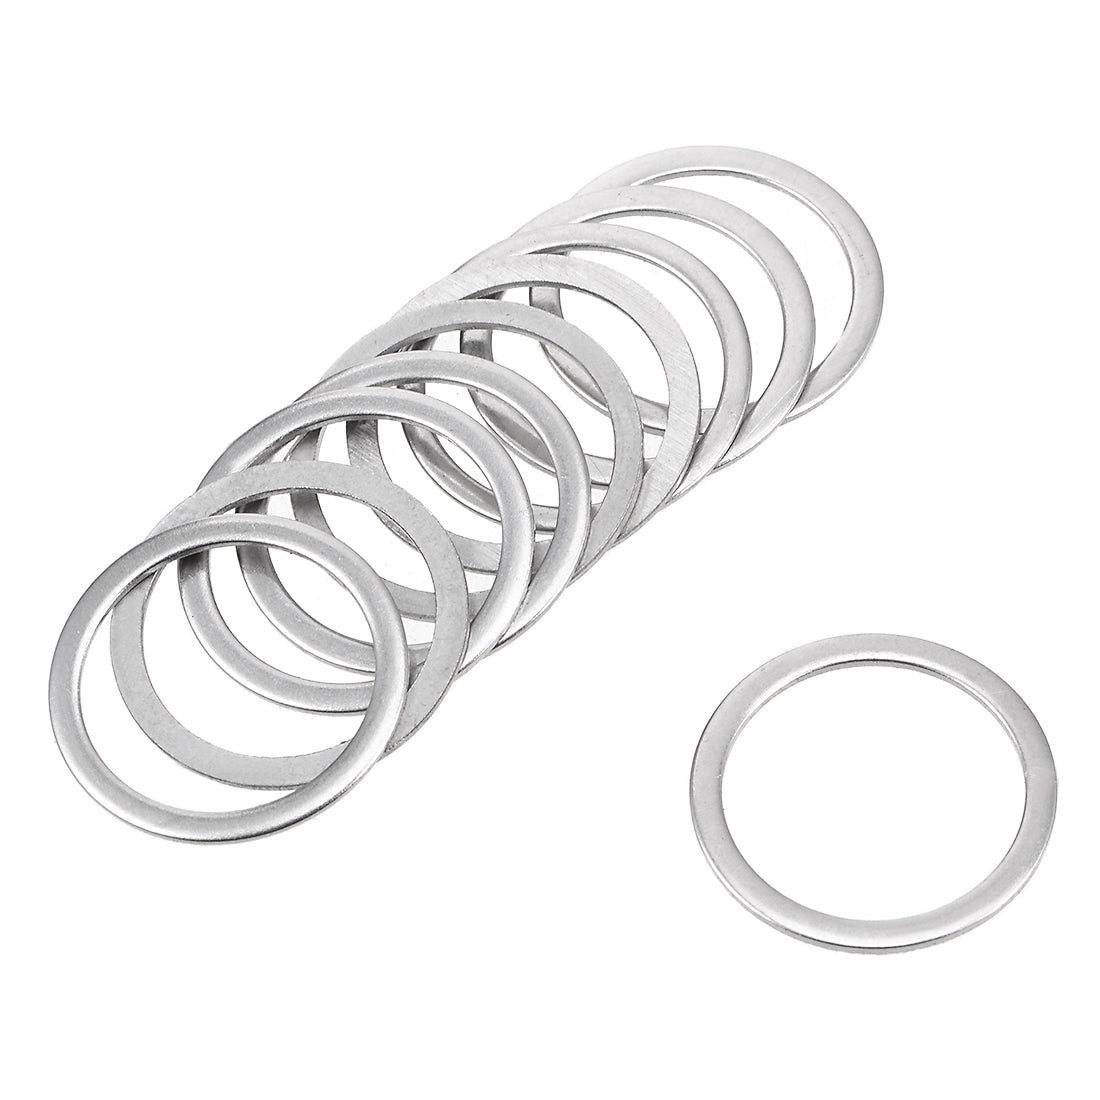 uxcell Uxcell 50 Pcs 16mm x 20mm x 0.8mm 304 Stainless Steel Flat Washer for Screw Bolt